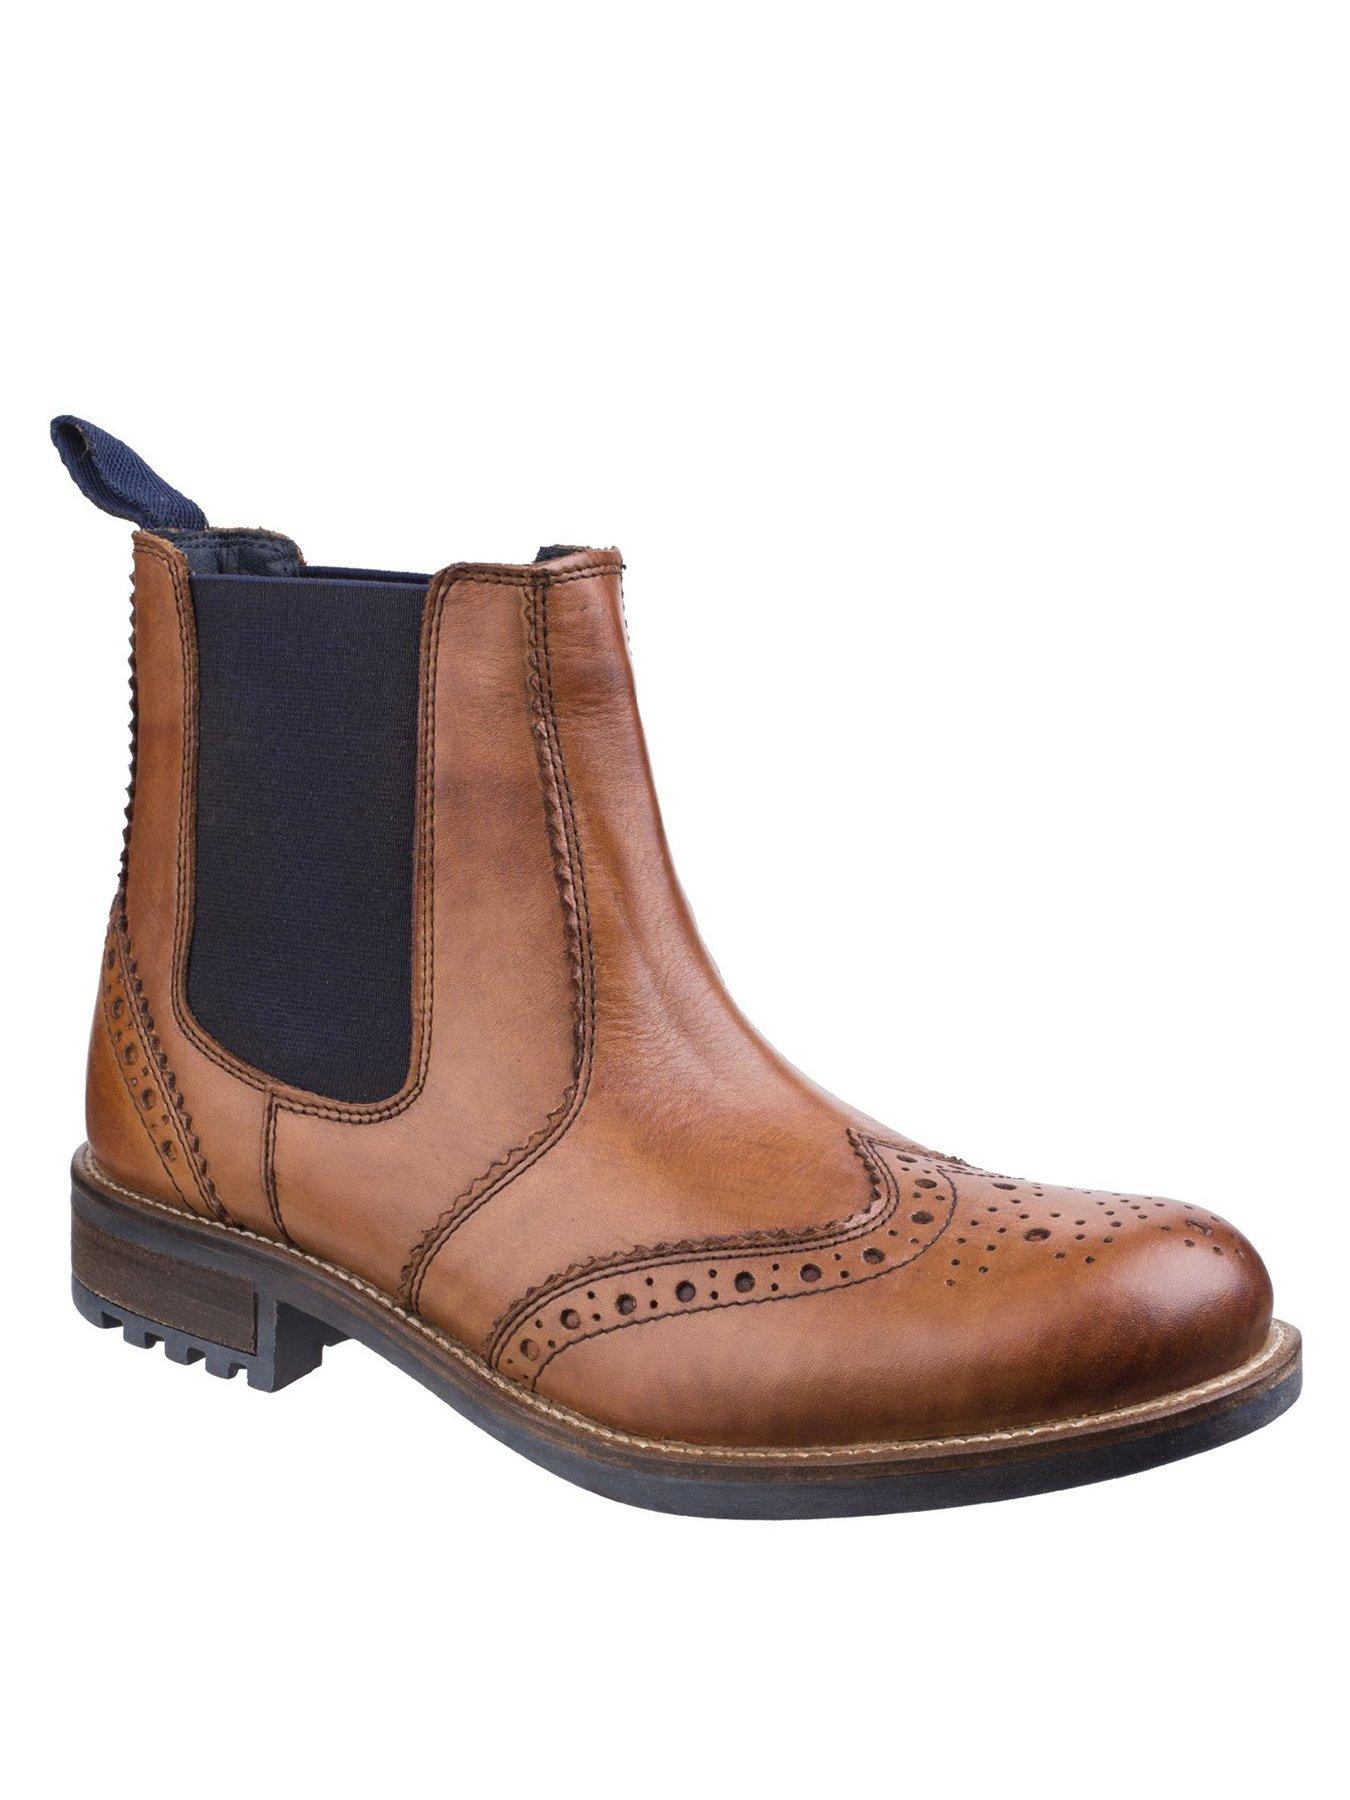 Shoes & boots Cirencester Leather Brogue Boots - Tan